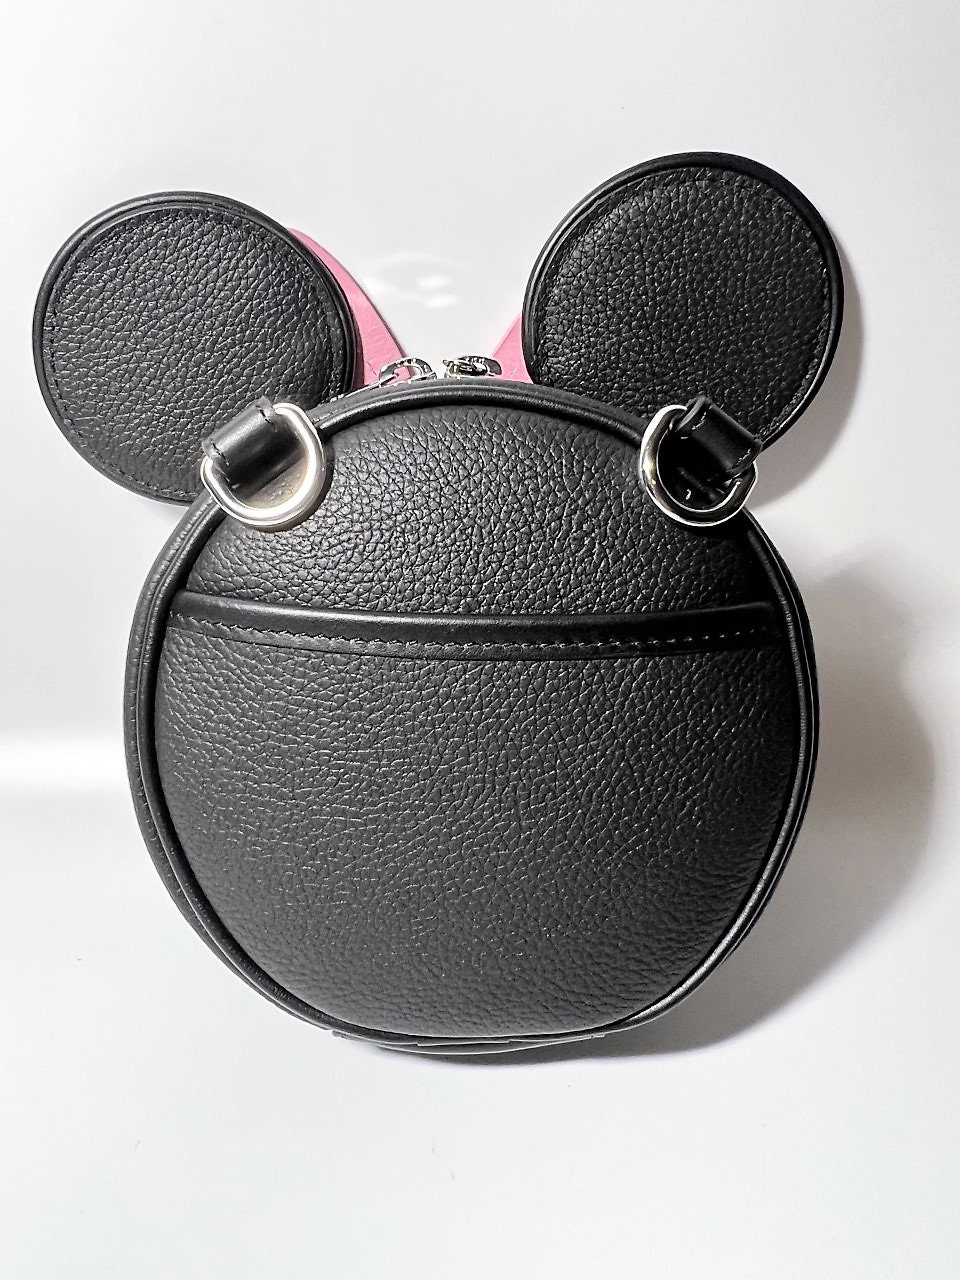 Sheron Barber Releases Louis Vuitton and Disney Inspired Custom